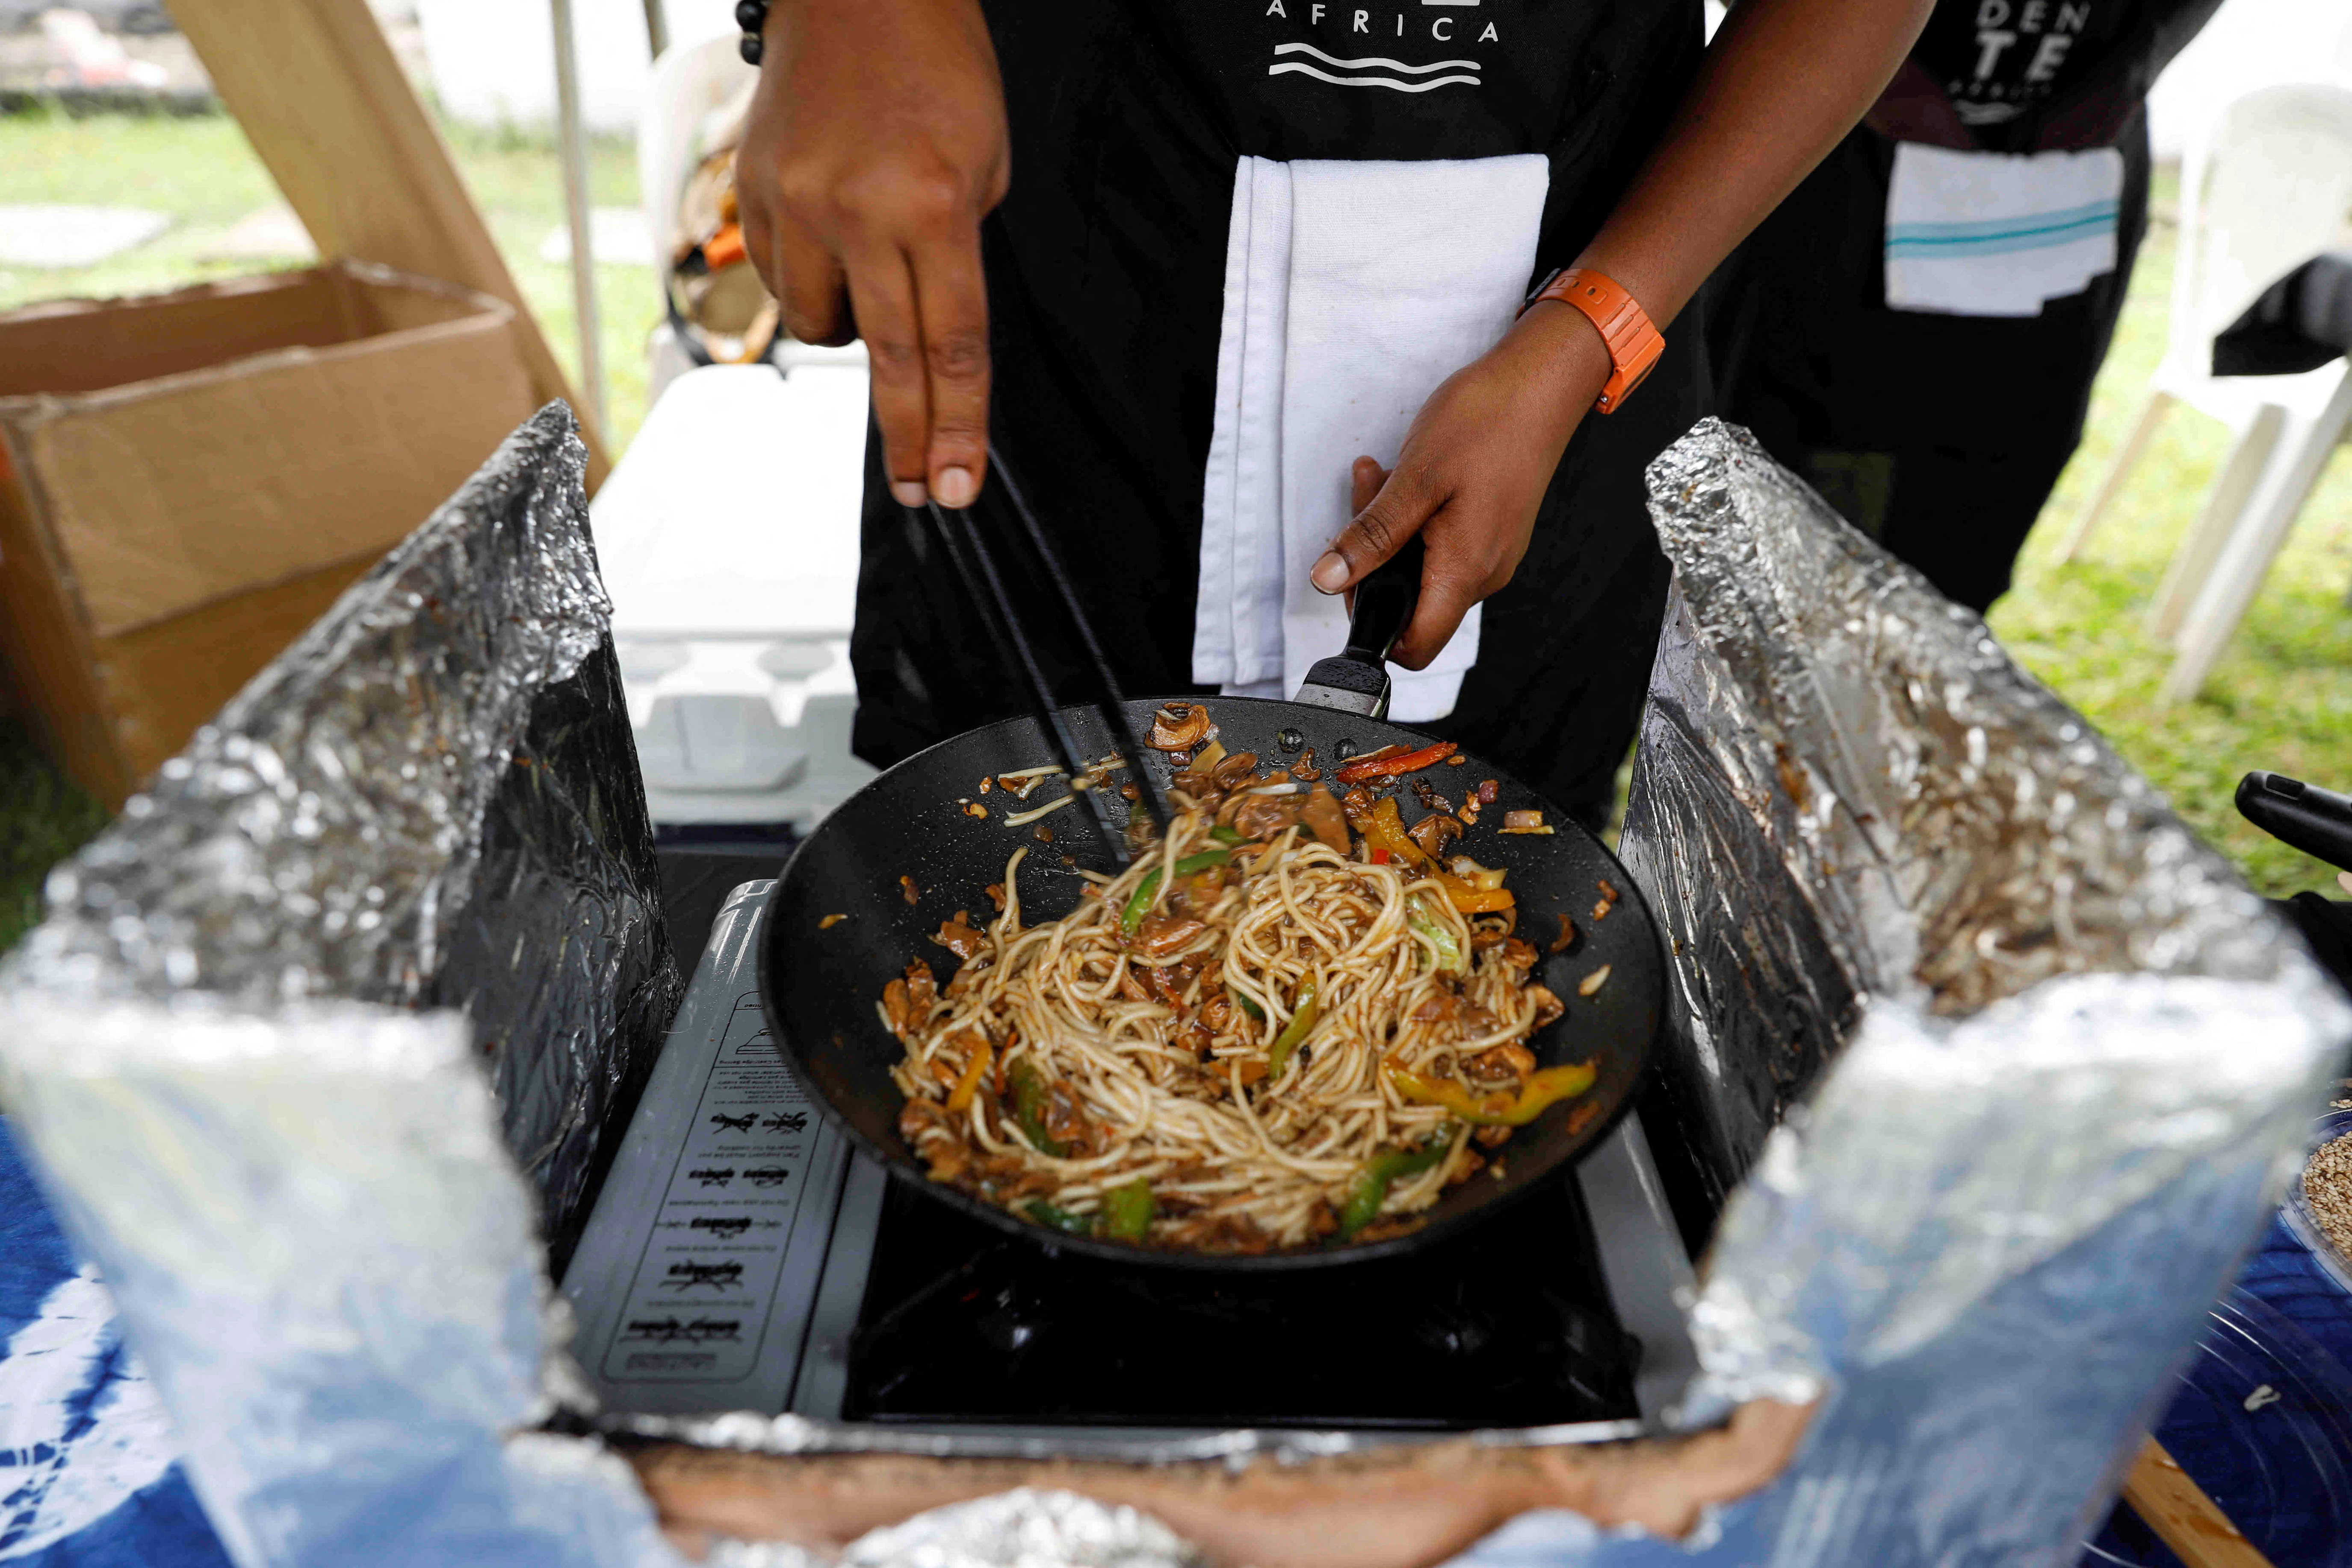 CEO of Aldente Africa Renee Chuks cooks gluten-free pasta made of cassava for a customer during a weekly farmers' market in Ikoyi, Lagos